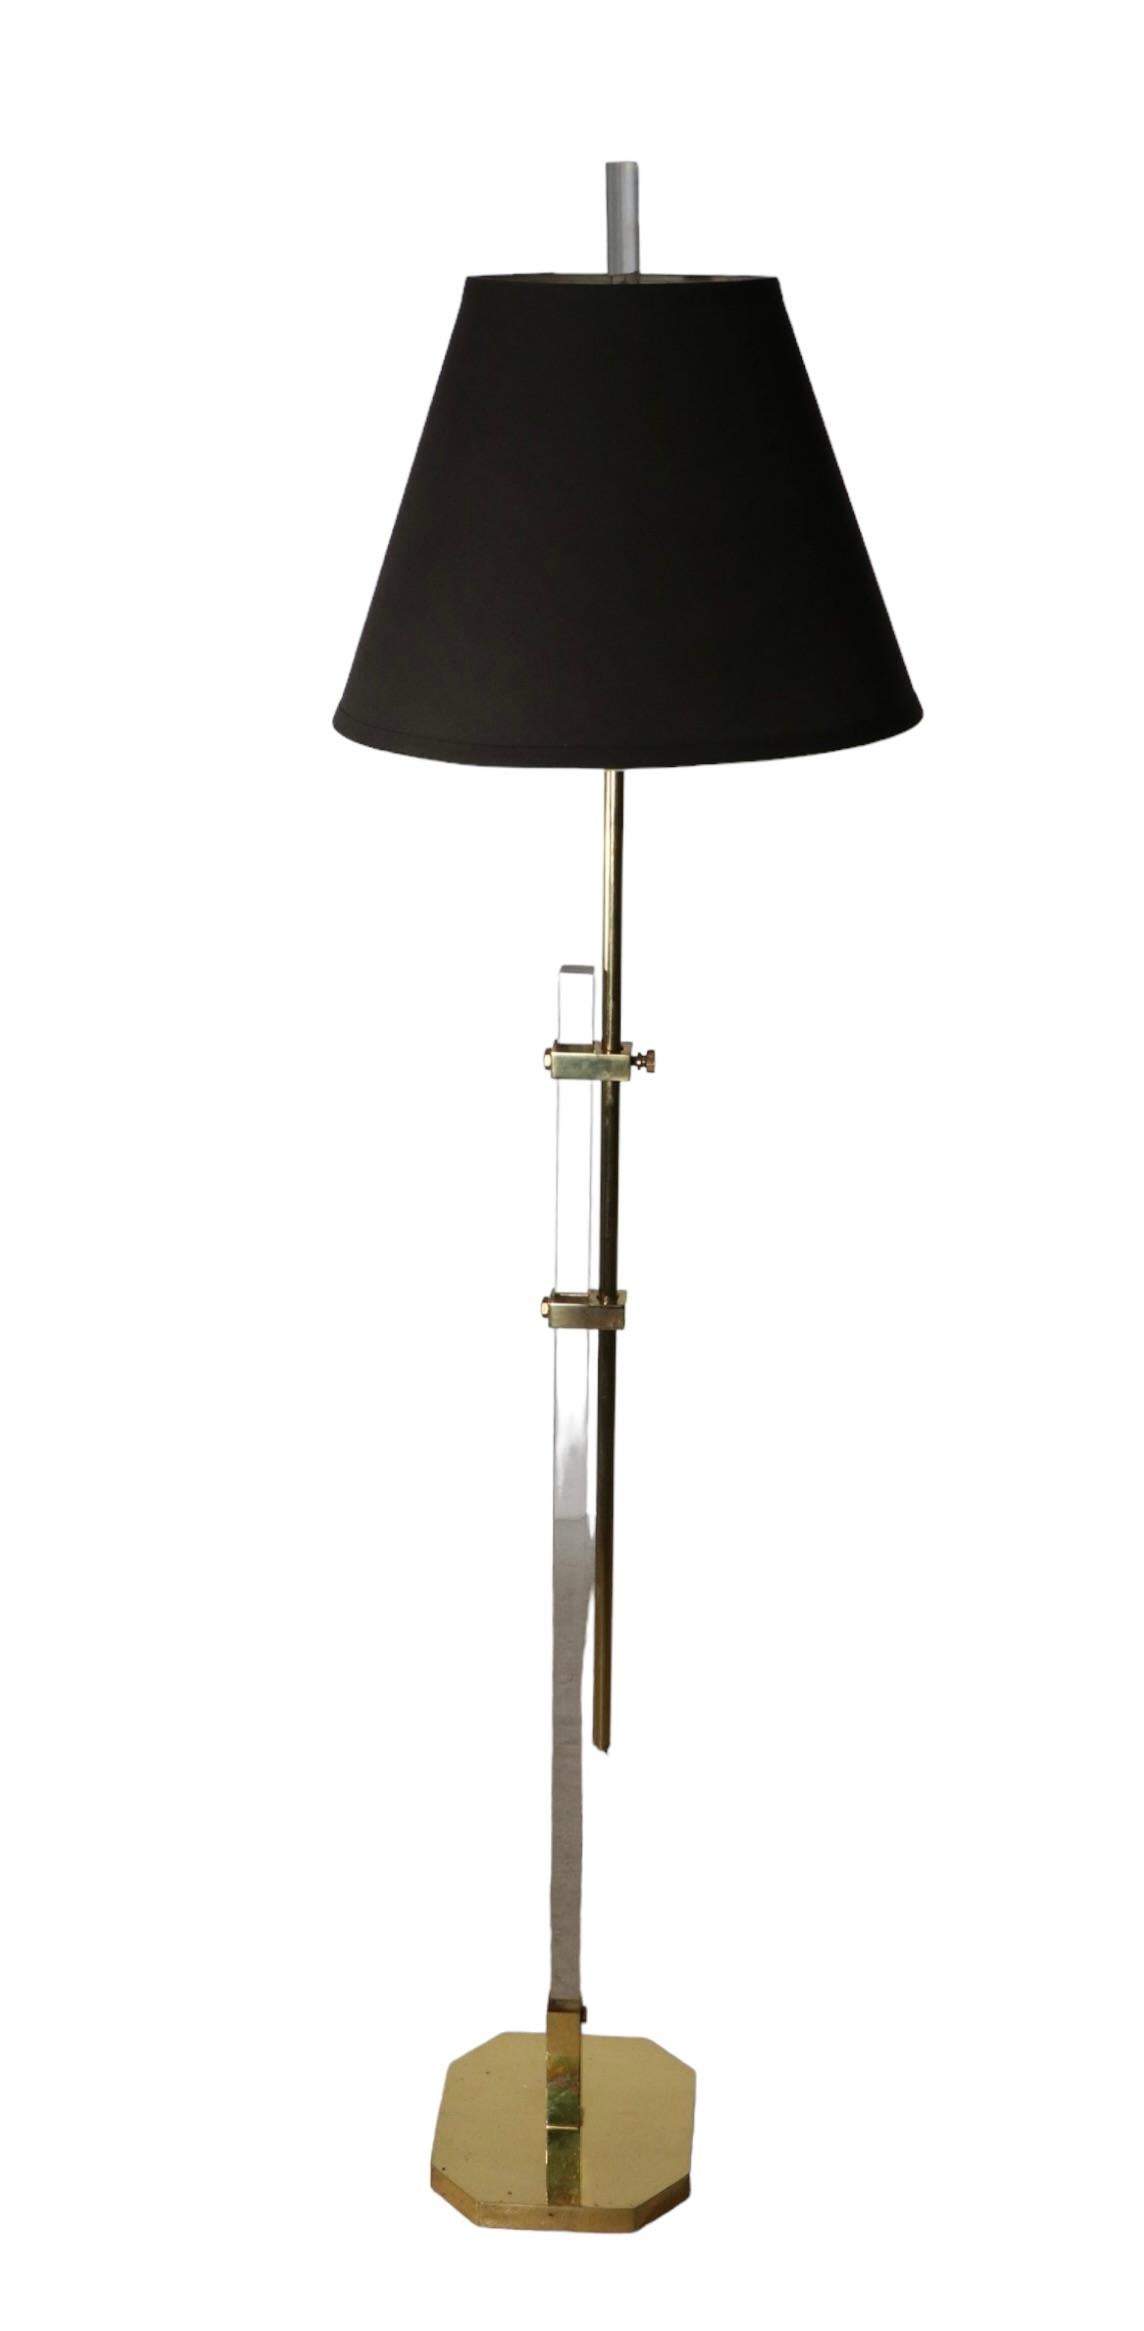  Adjustable Hollywood Regency Style Brass and Lucite Floor Lamp c. 1970/1980's For Sale 6